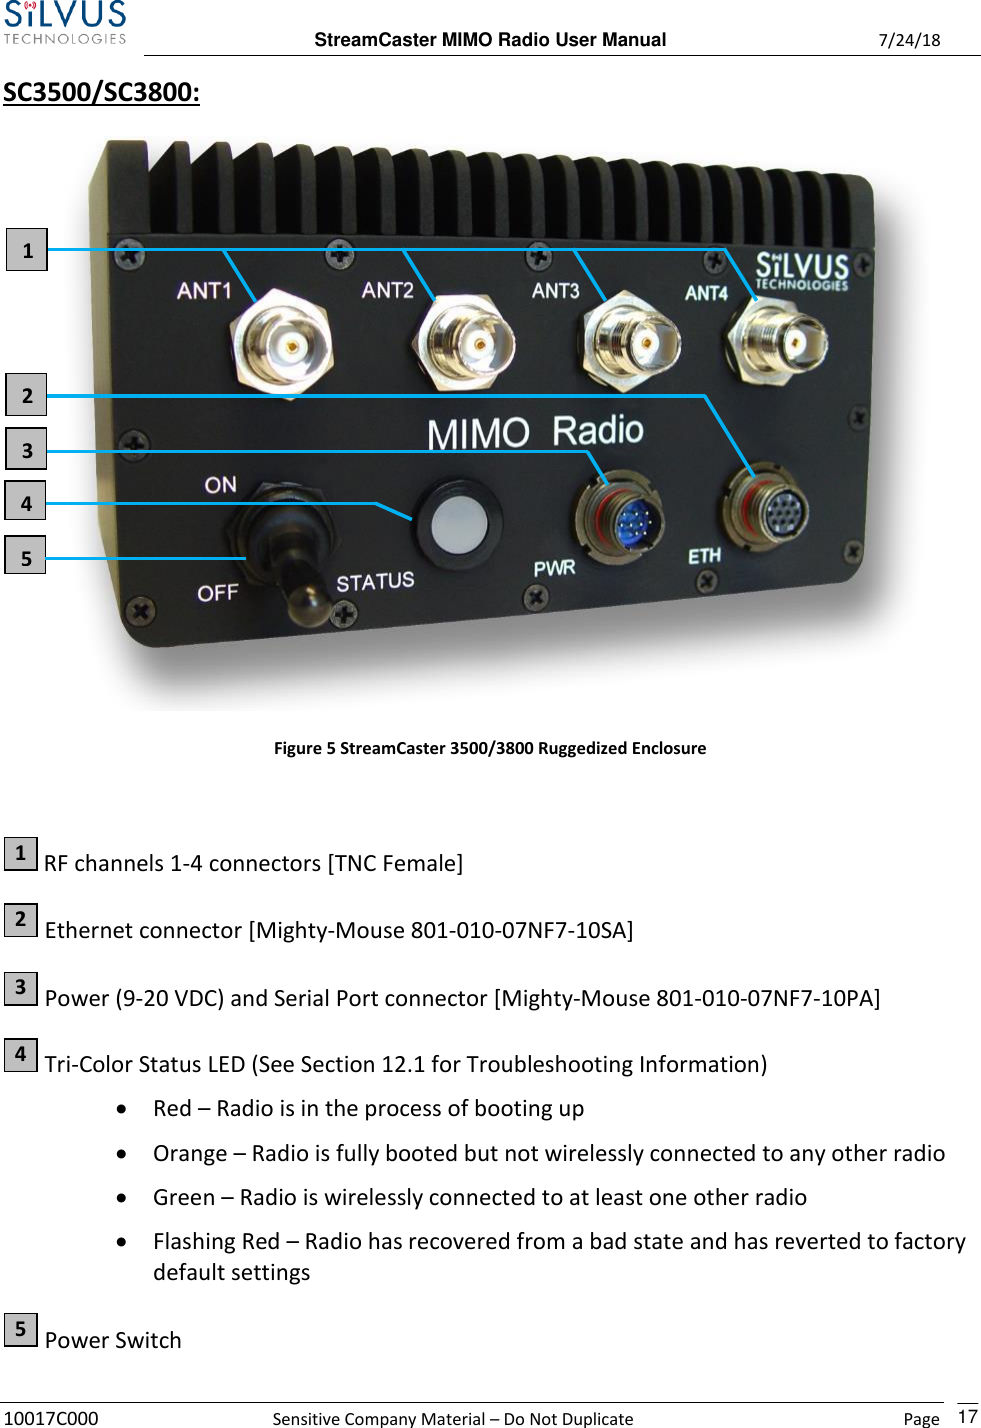  StreamCaster MIMO Radio User Manual  7/24/18 10017C000  Sensitive Company Material – Do Not Duplicate    Page    17 SC3500/SC3800:    Figure 5 StreamCaster 3500/3800 Ruggedized Enclosure   RF channels 1-4 connectors [TNC Female]  Ethernet connector [Mighty-Mouse 801-010-07NF7-10SA]  Power (9-20 VDC) and Serial Port connector [Mighty-Mouse 801-010-07NF7-10PA]  Tri-Color Status LED (See Section 12.1 for Troubleshooting Information) • Red – Radio is in the process of booting up • Orange – Radio is fully booted but not wirelessly connected to any other radio • Green – Radio is wirelessly connected to at least one other radio • Flashing Red – Radio has recovered from a bad state and has reverted to factory default settings  Power Switch 1 2 3 4 5 2 3 4 5 1 